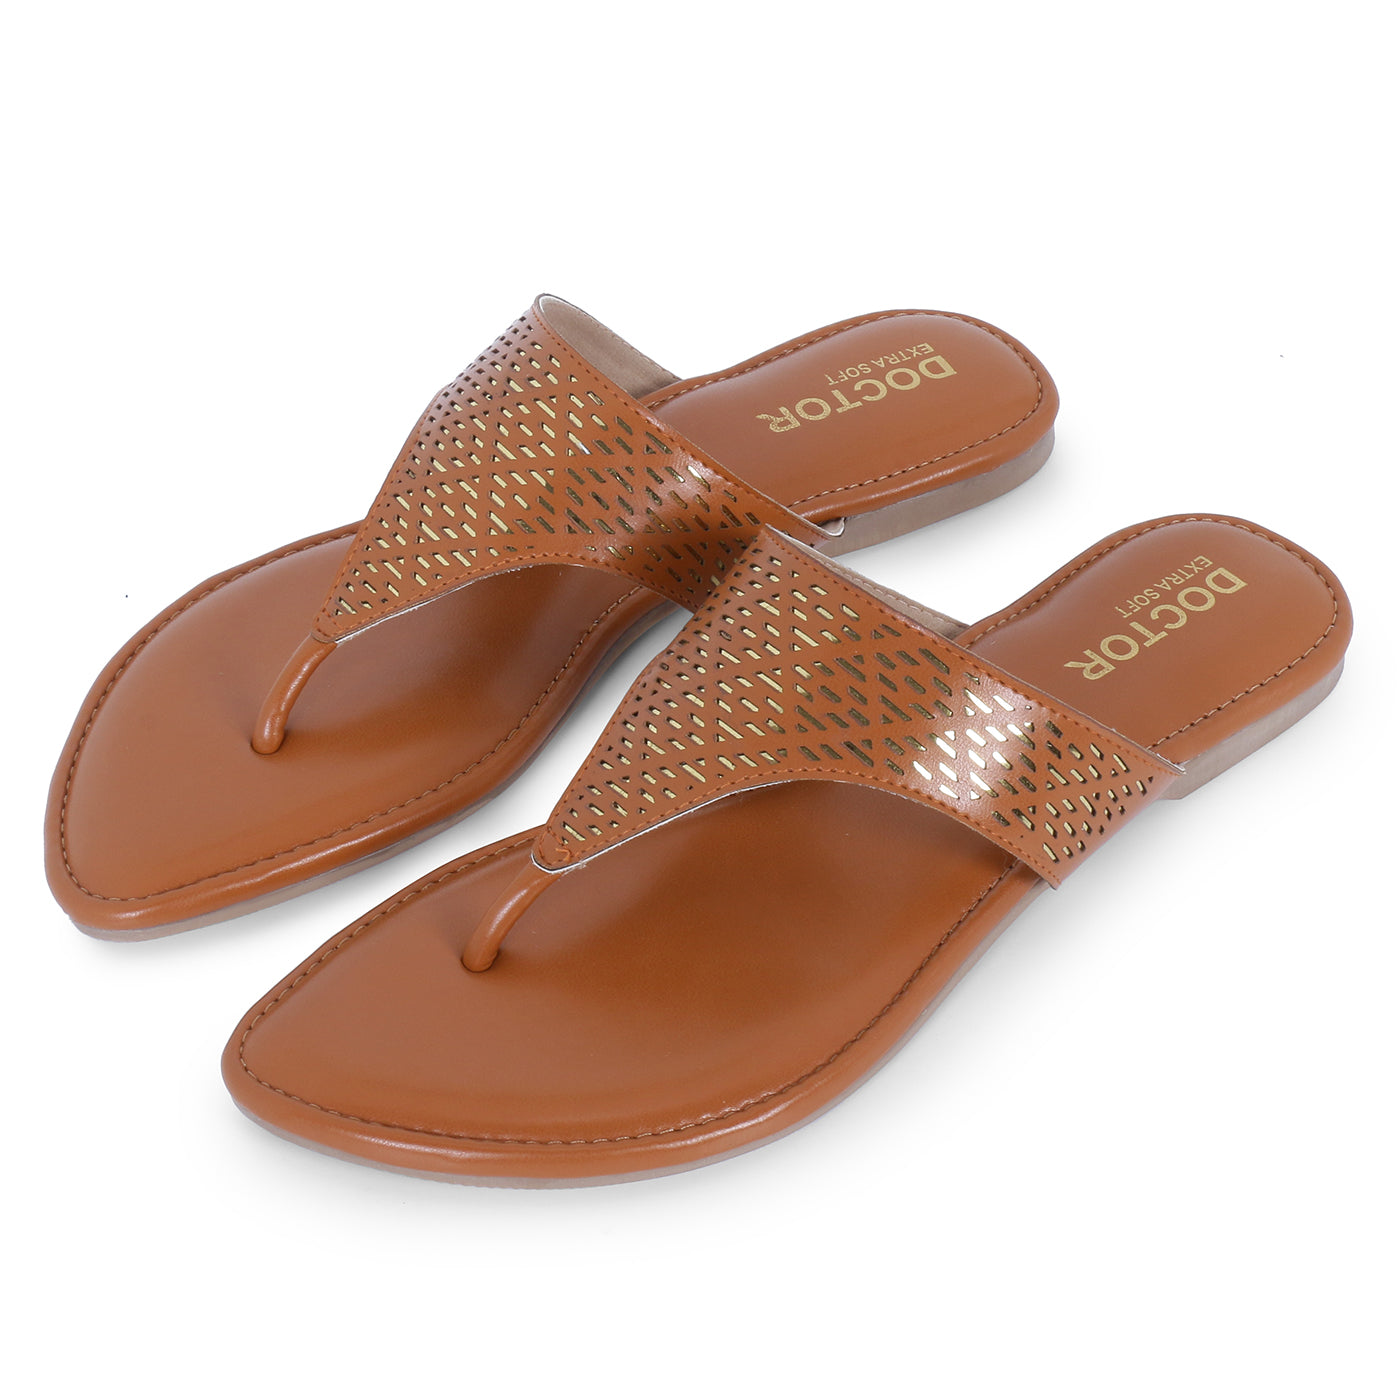 DOCTOR EXTRA SOFT D-651 Chappal Ortho Care Orthopaedic and Diabetic Comfort Doctor Flip-Flop and House Slipper's for Women's